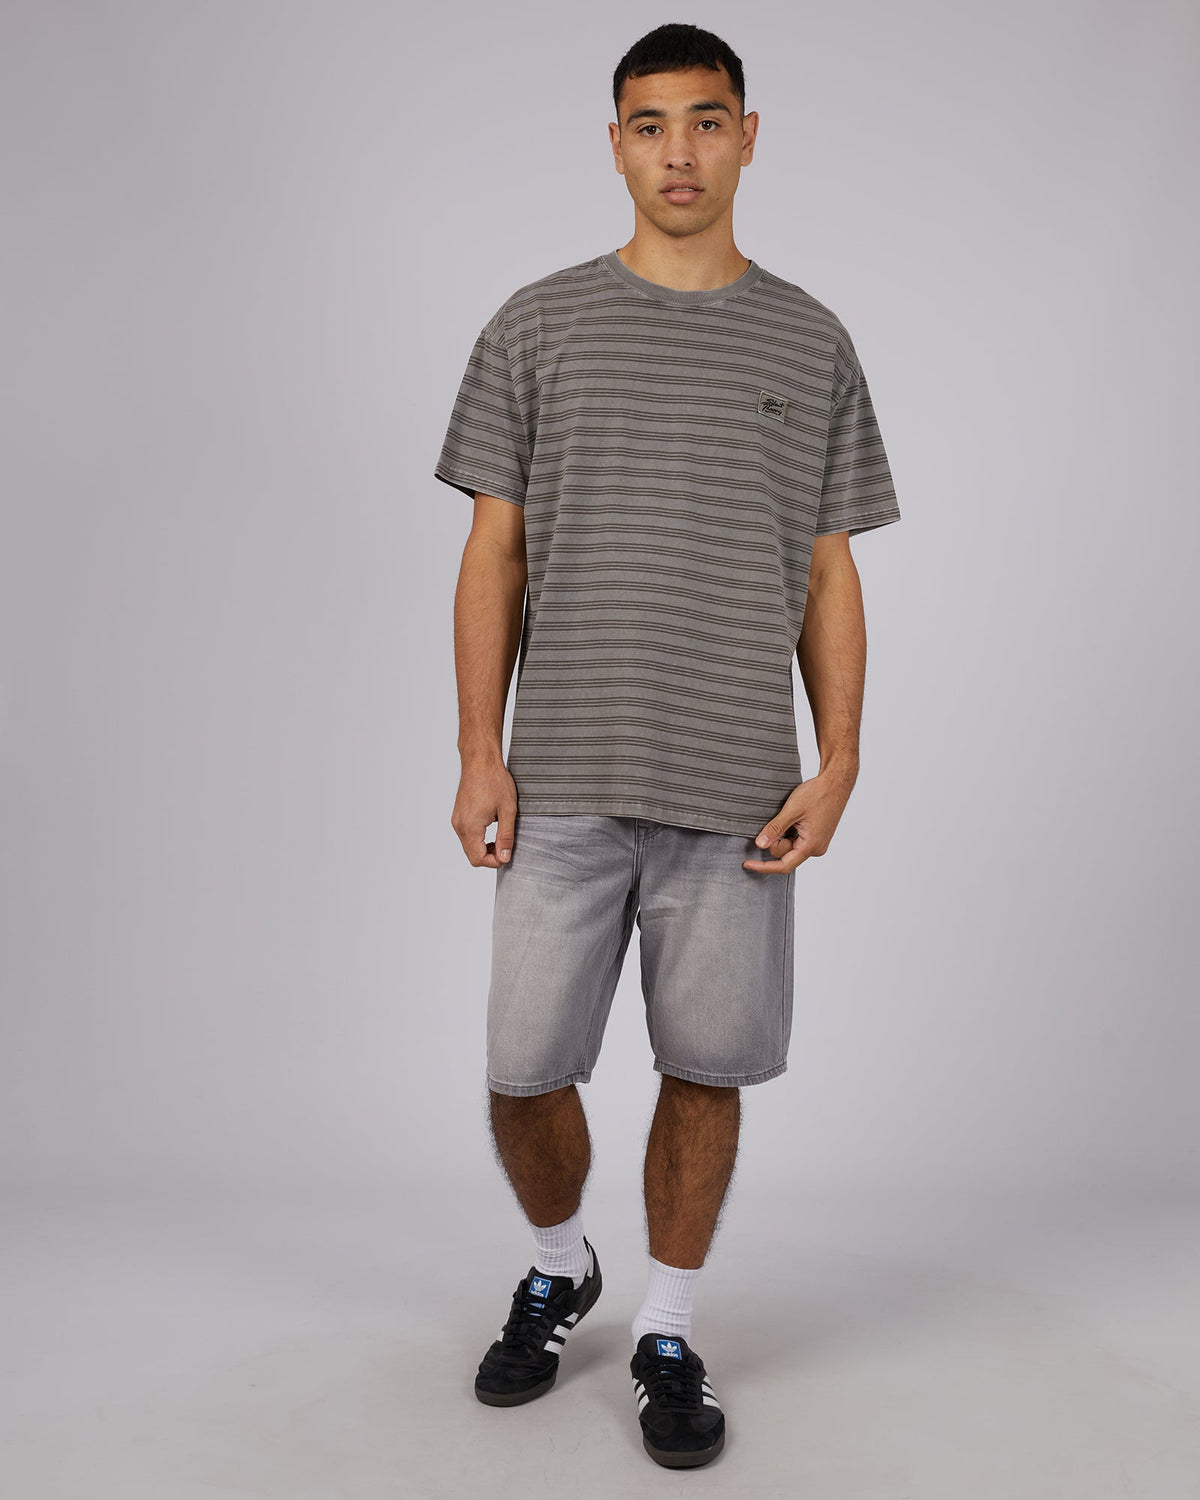 Silent Theory-Overdyed Stripe Tee Charcoal-Edge Clothing